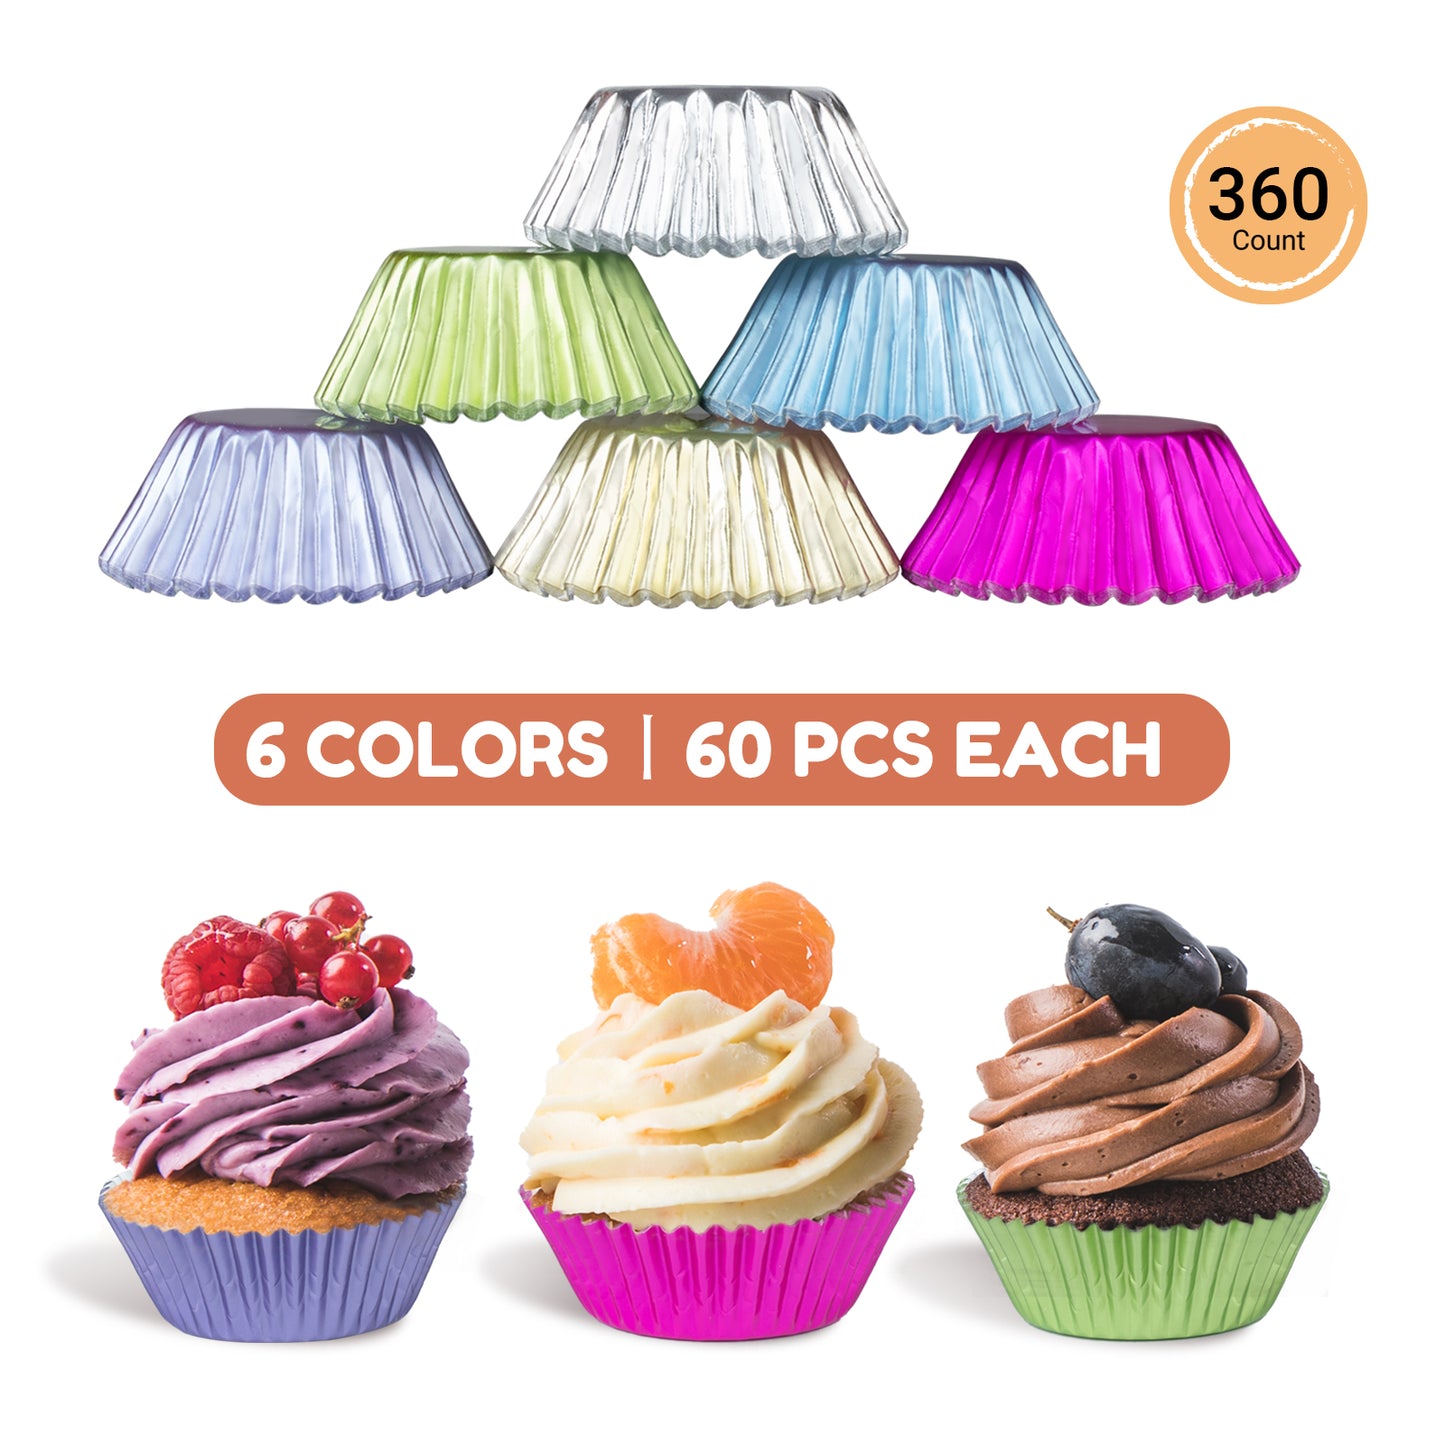 360pcs Metallic Foil Cupcake Liners - 1.25 Inches